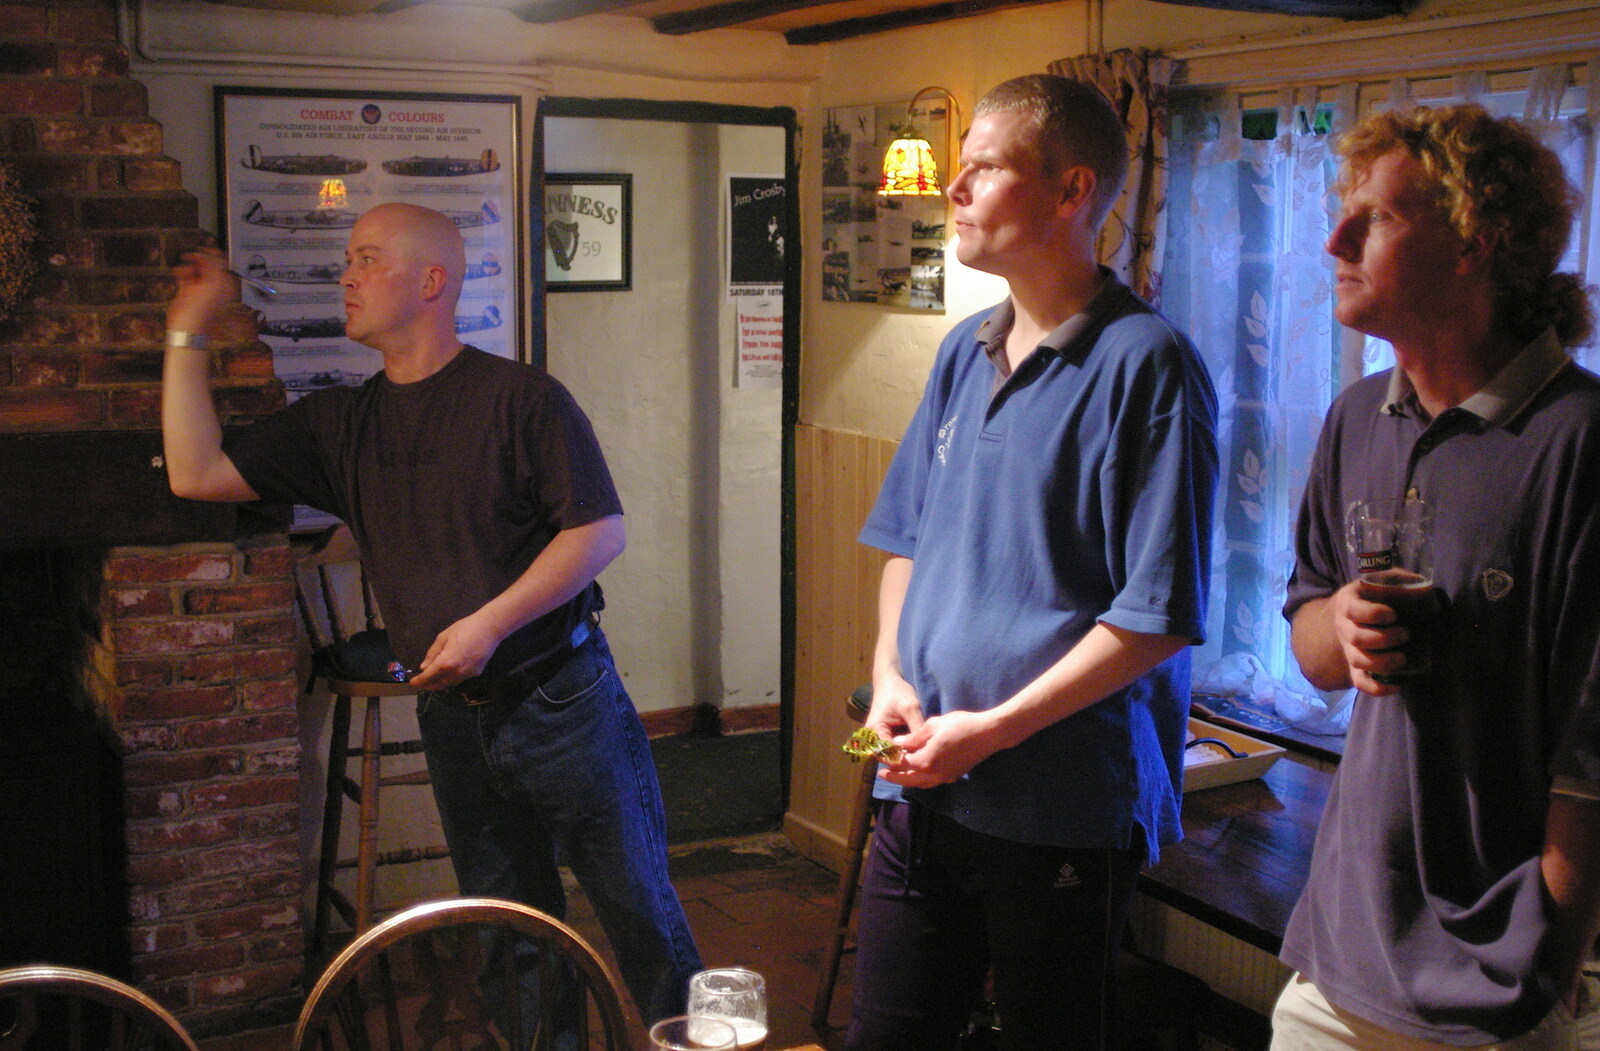 The game is on in the Tibenham Greyhound from A BSCC Bike Ride and an Indoor Barbeque at the Swan, Tibenham and Brome - 16th June 2005